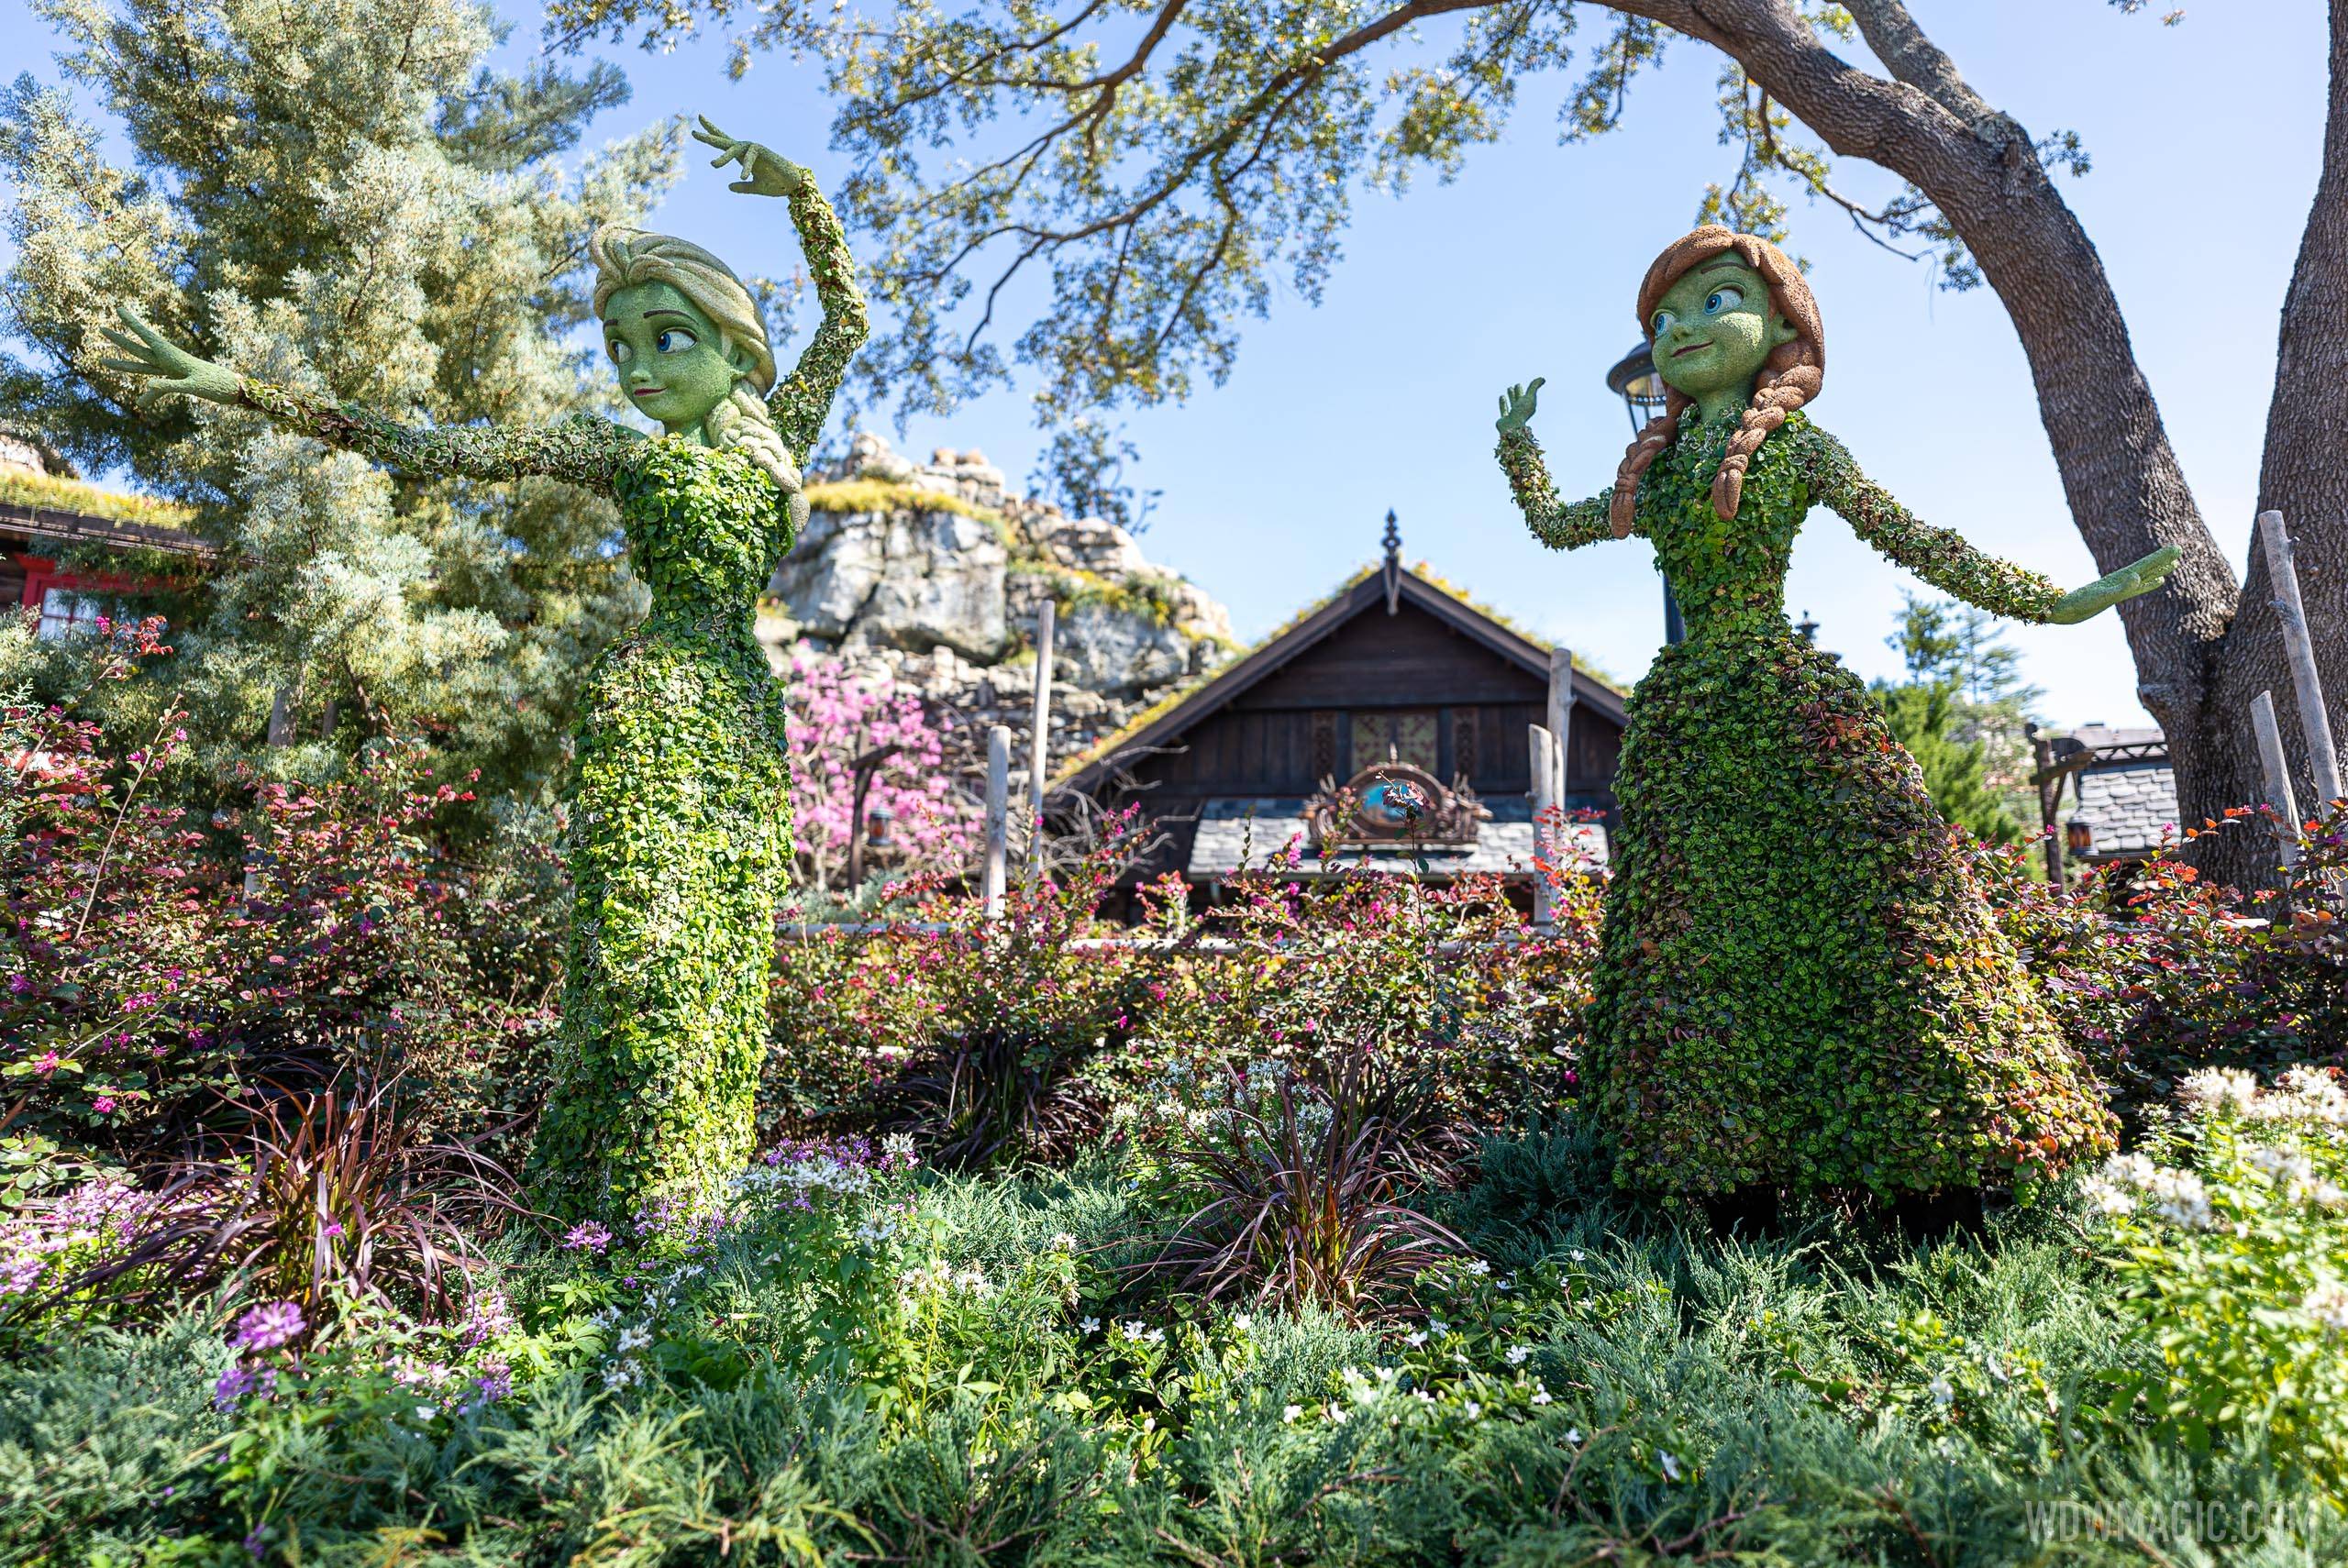 2021 Taste of EPCOT International Flower and Garden Festival topiary and gardens